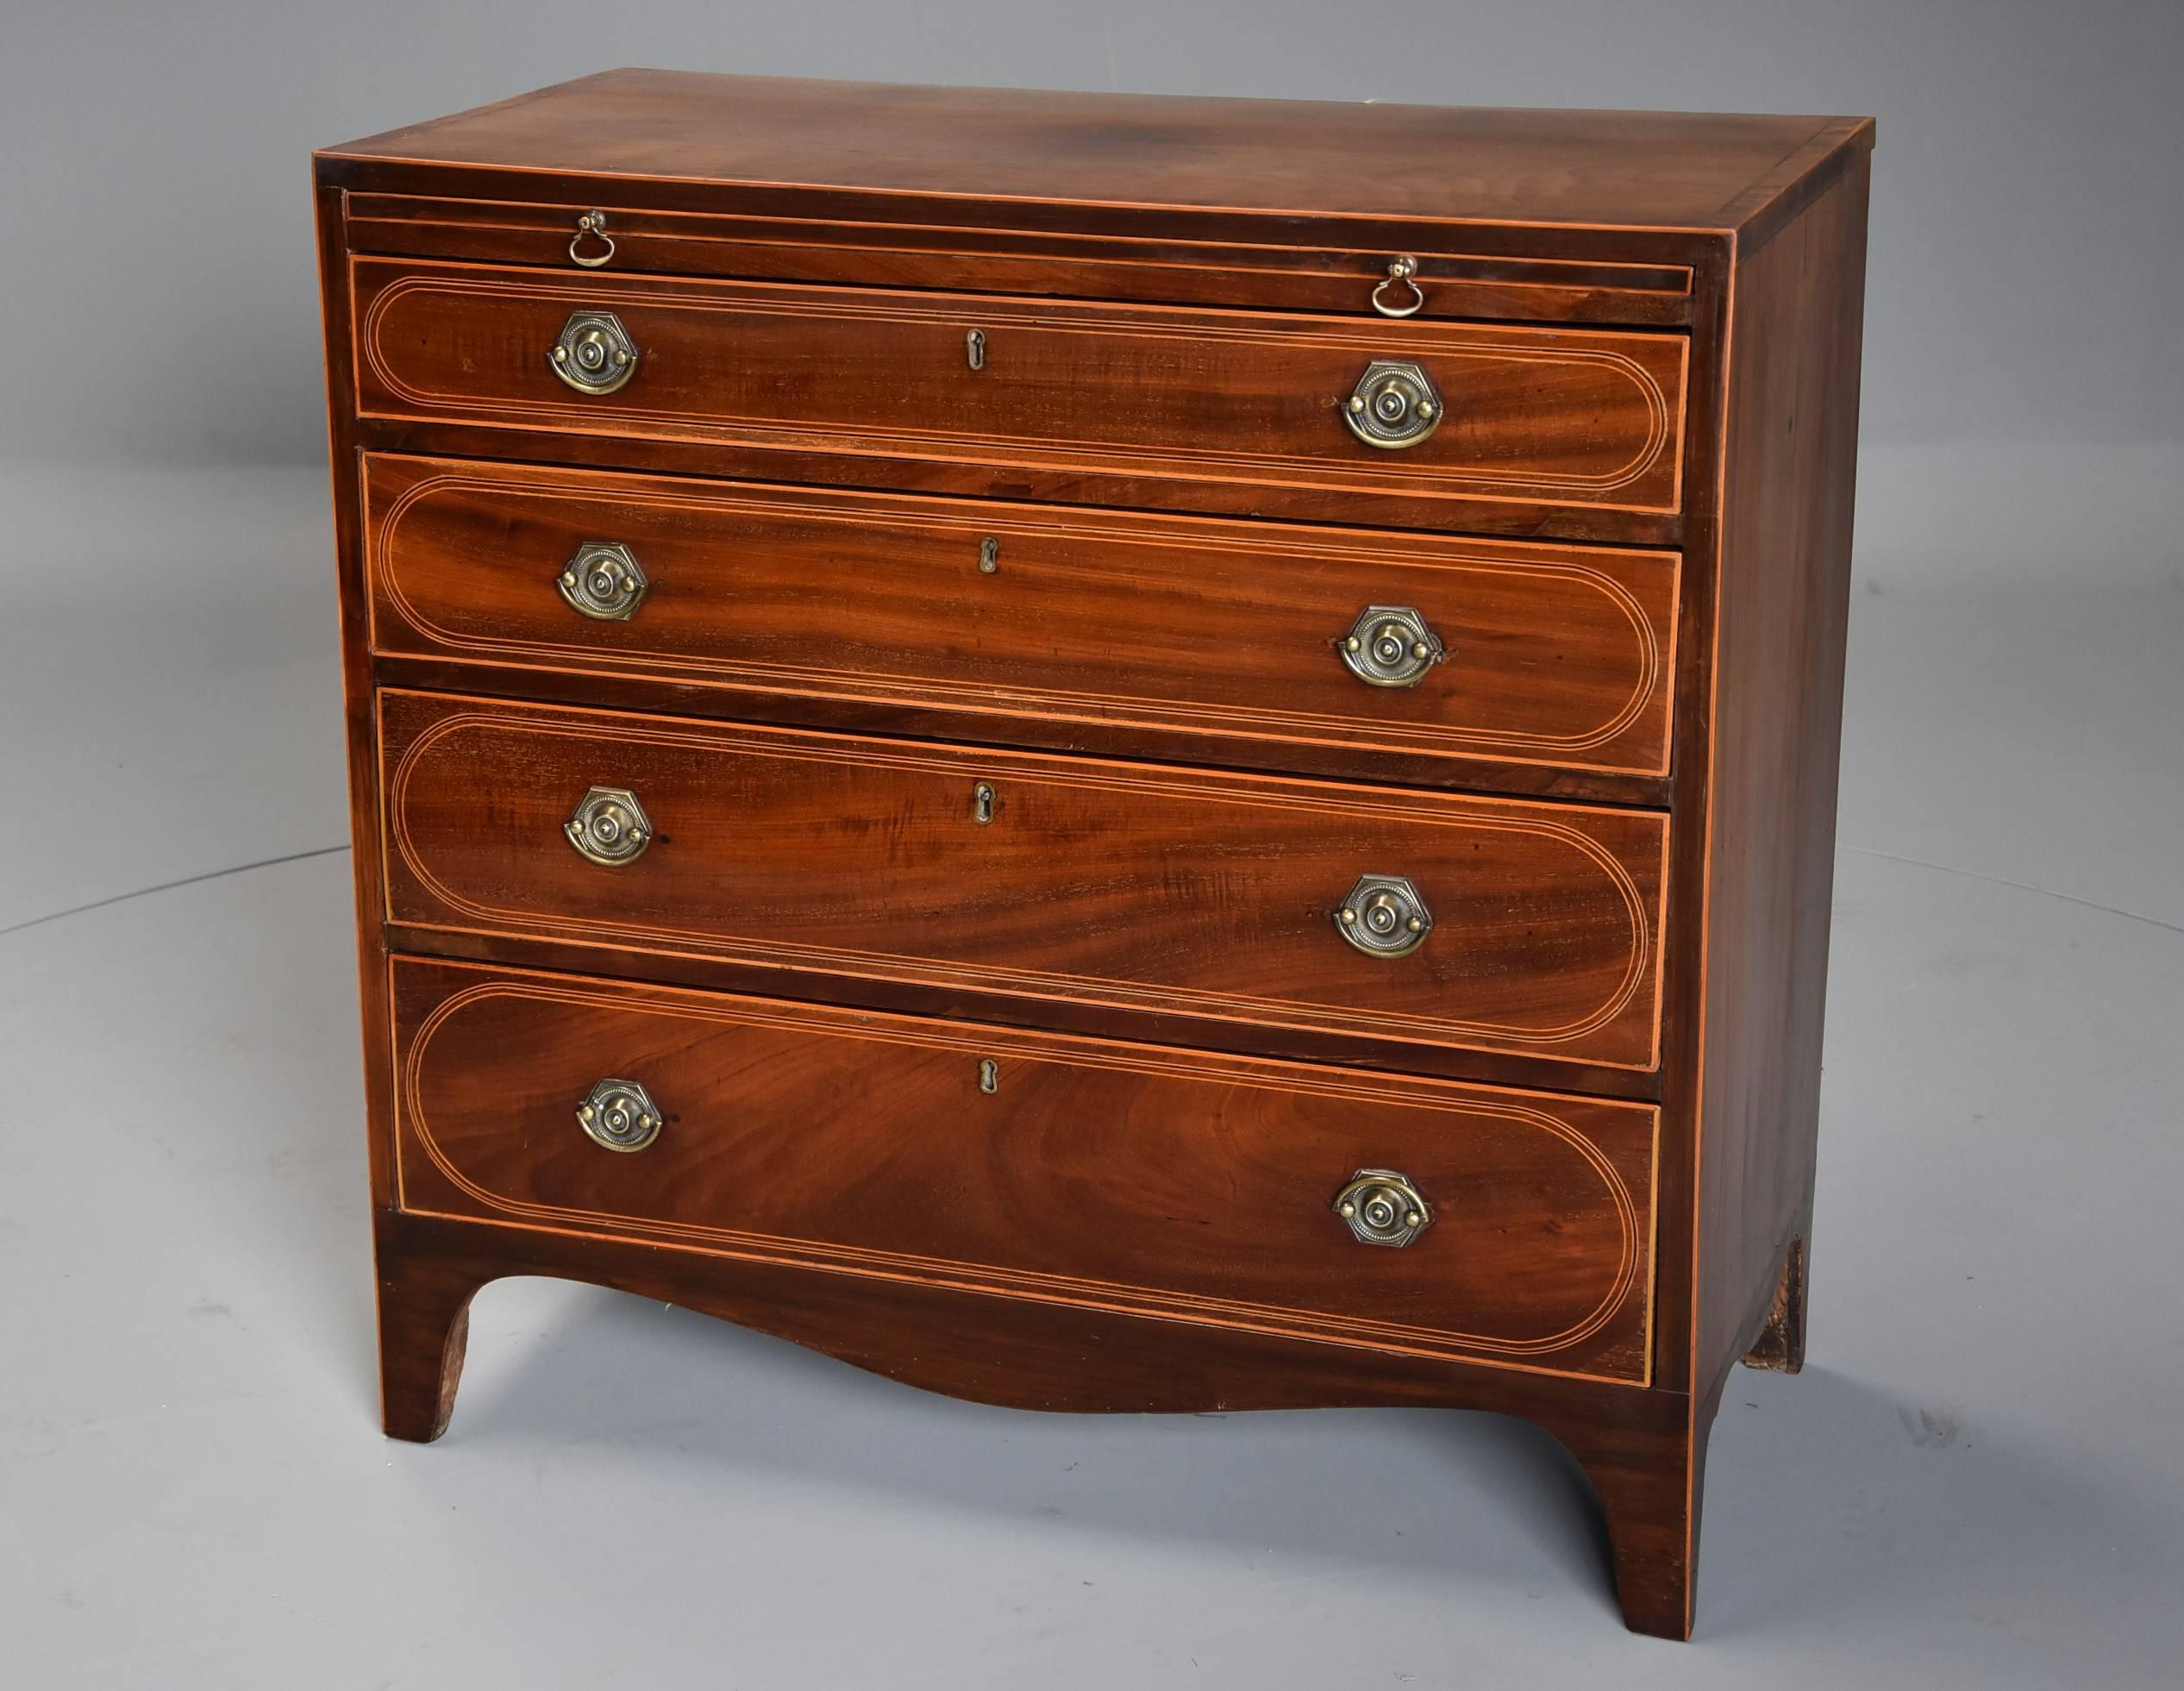 An elegant late 19th/early 20th century mahogany chest of drawers in the Hepplewhite style by Druce & Co, London.

This chest of drawers consists of a mahogany veneered top with boxwood and mahogany stringing with mahogany crossbanding and outer